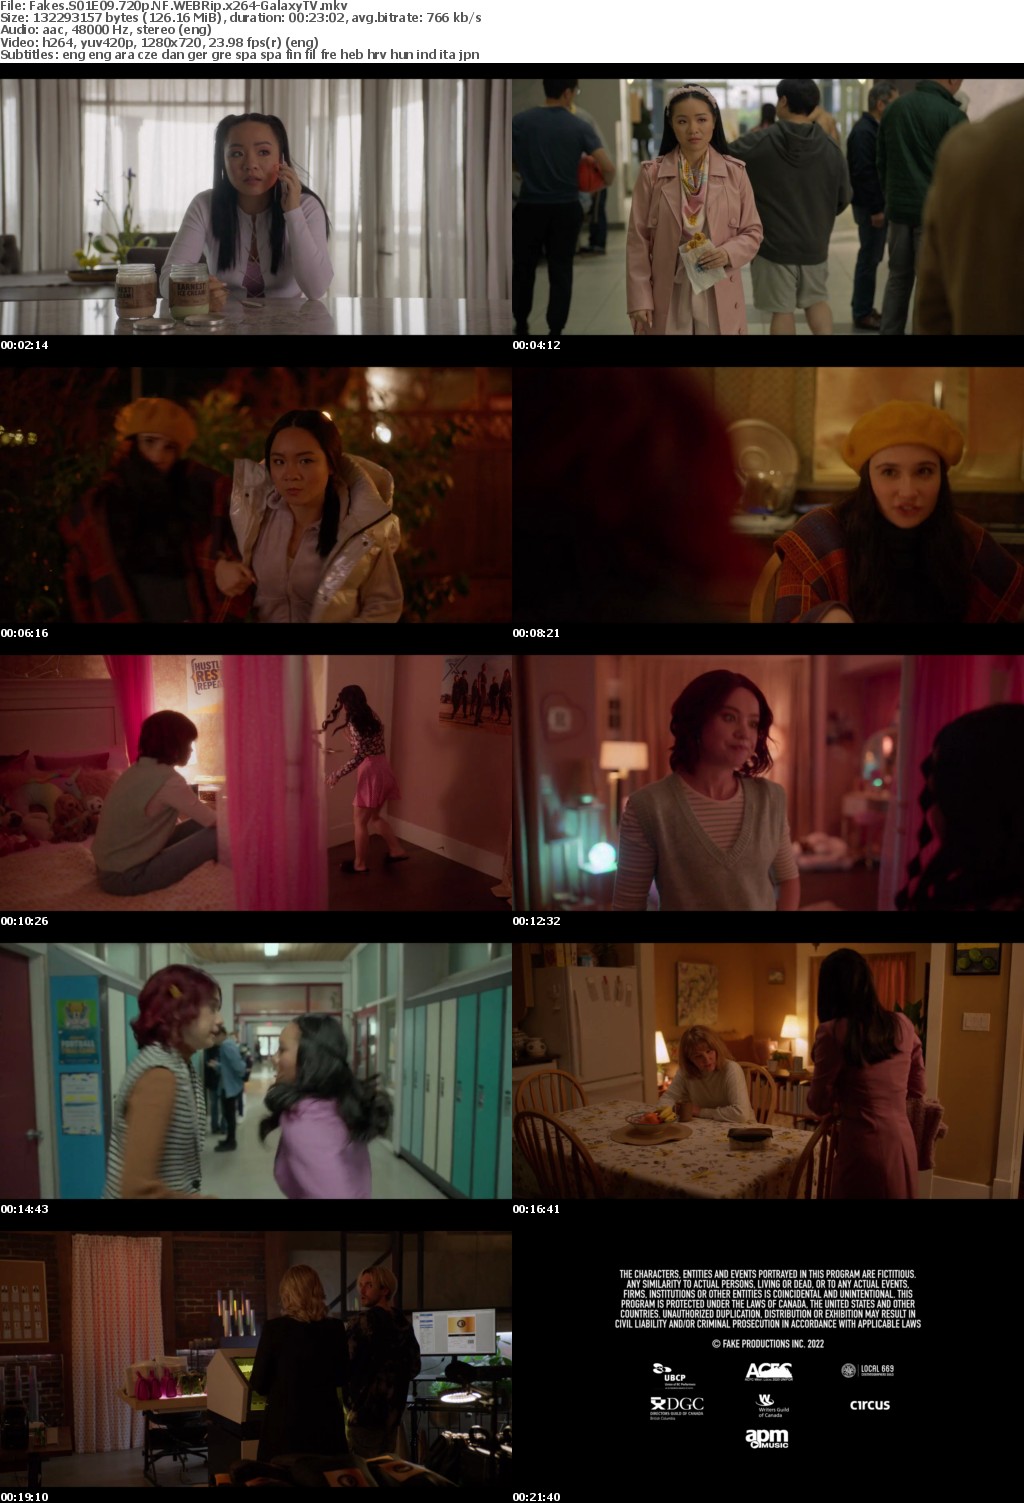 Fakes S01 COMPLETE 720p NF WEBRip x264-GalaxyTV